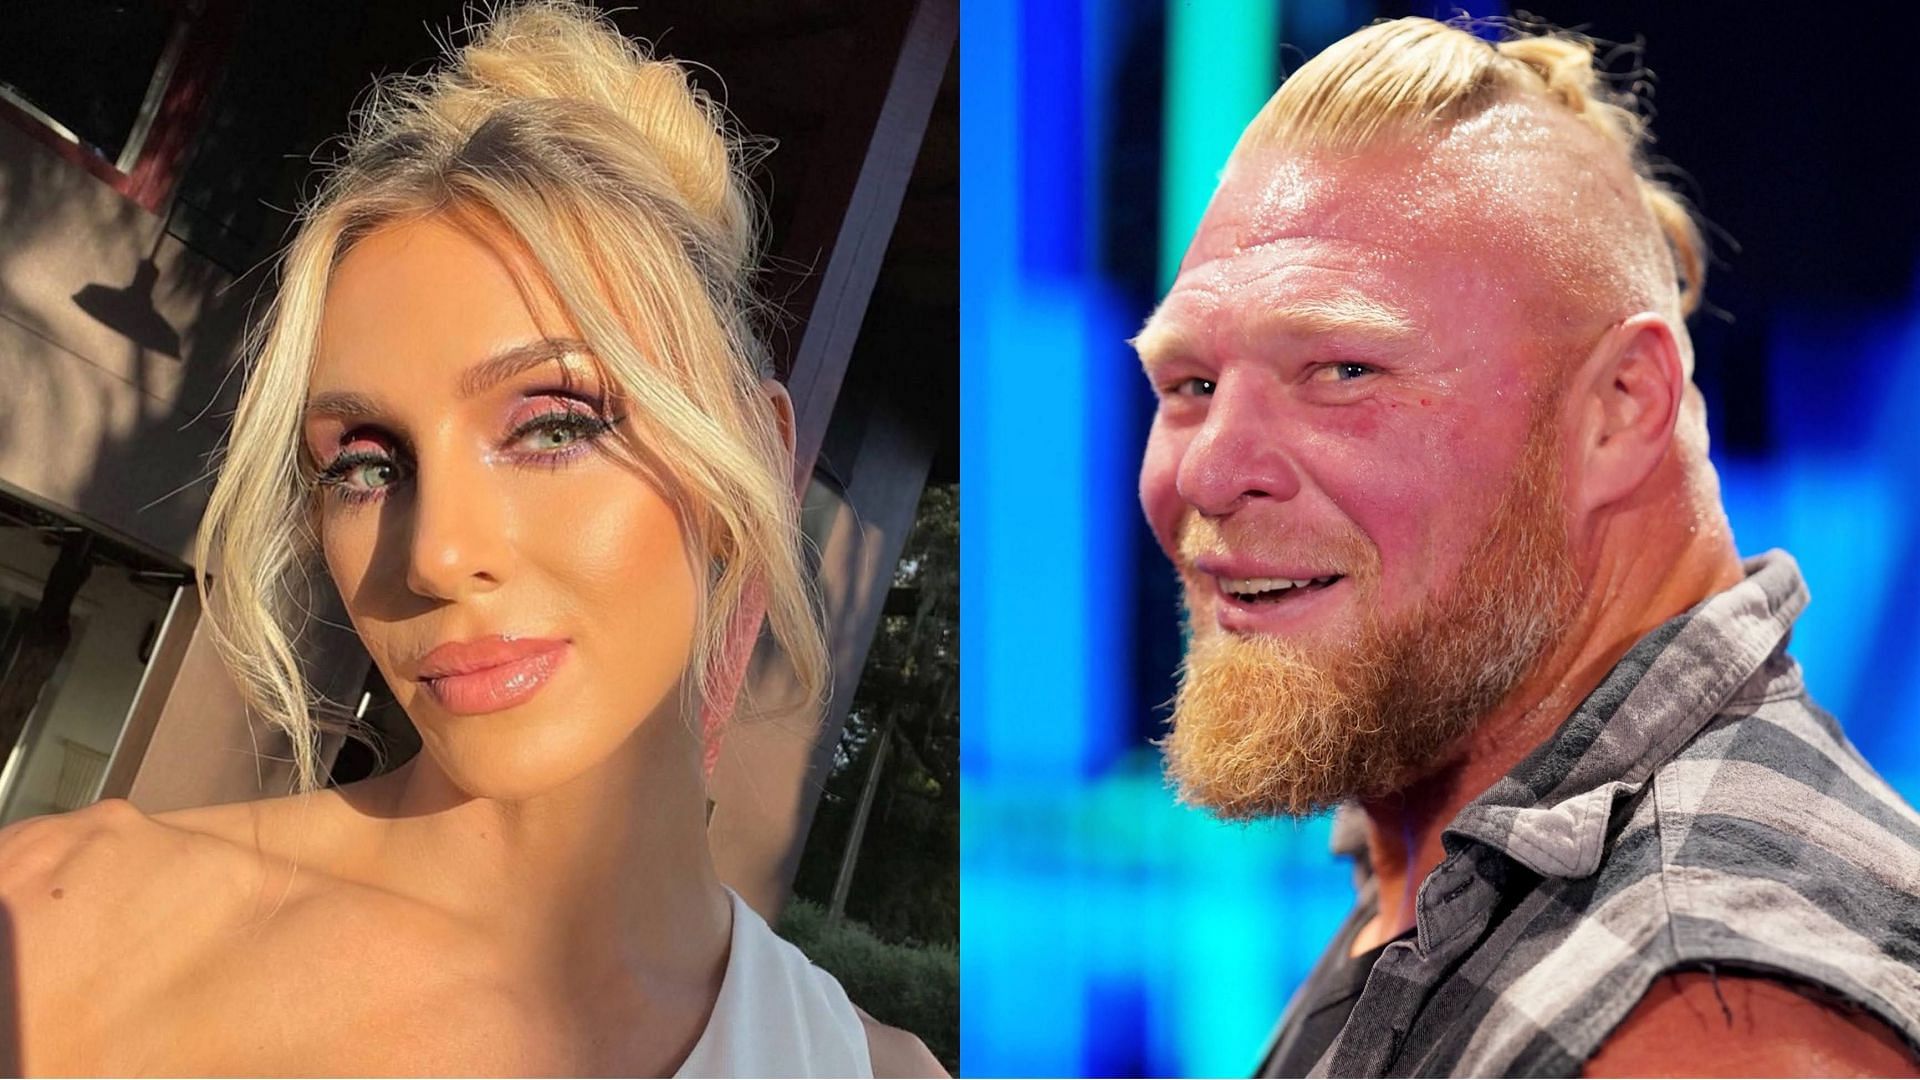 Charlotte Flair (left) and Brock Lesnar (right)